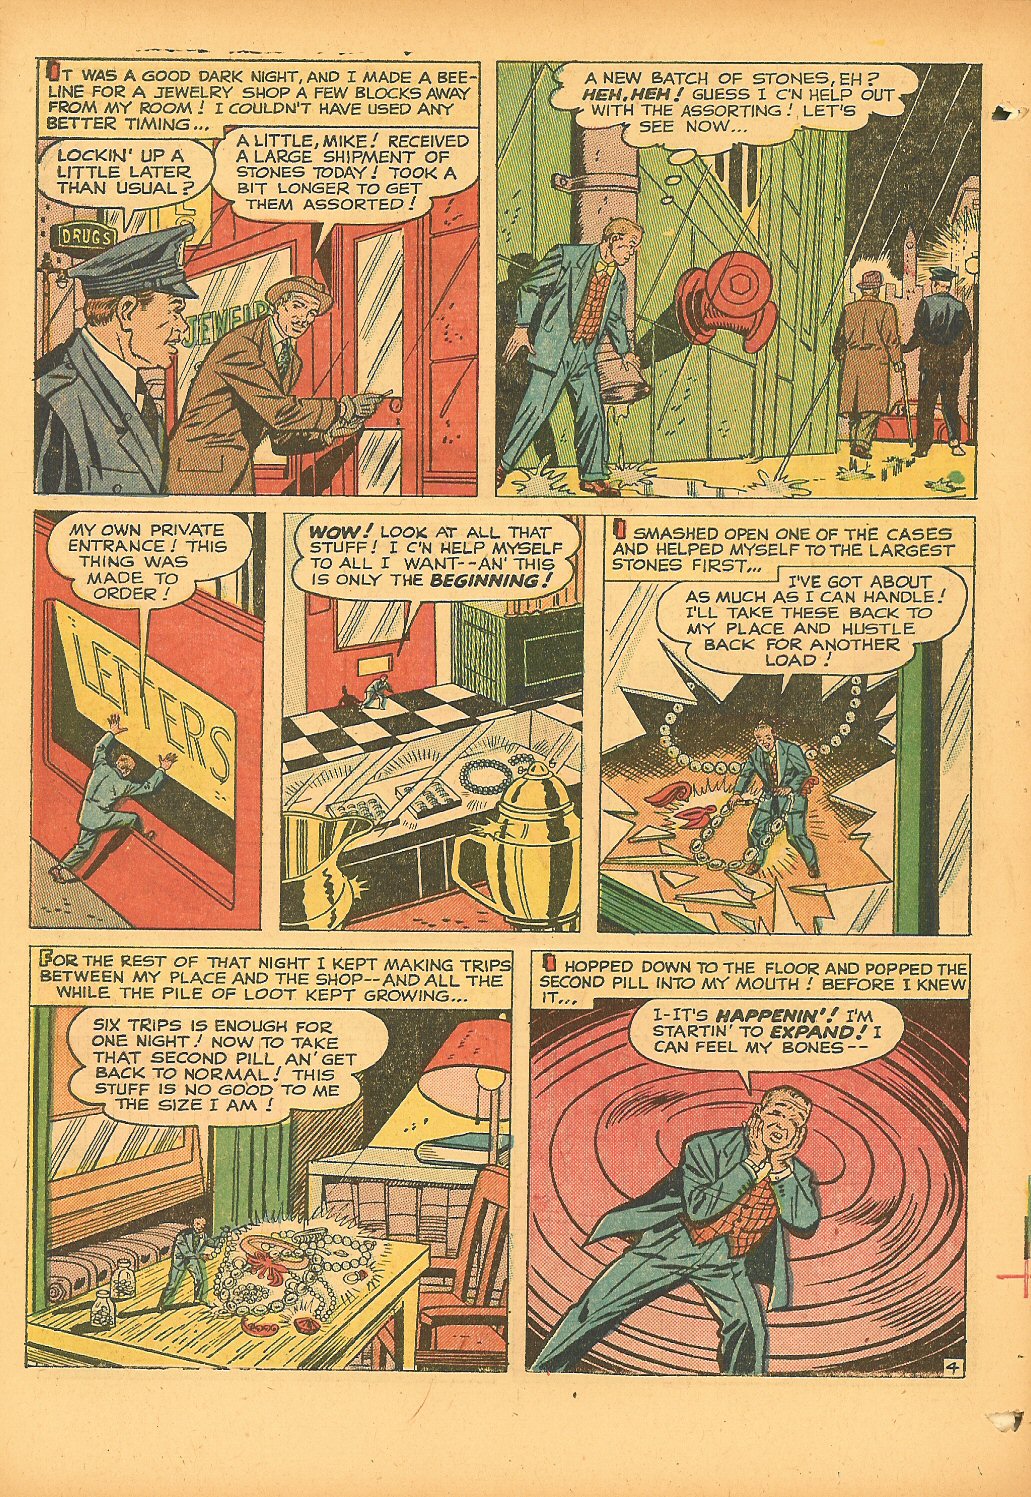 Marvel Tales (1949) 100 Page 4